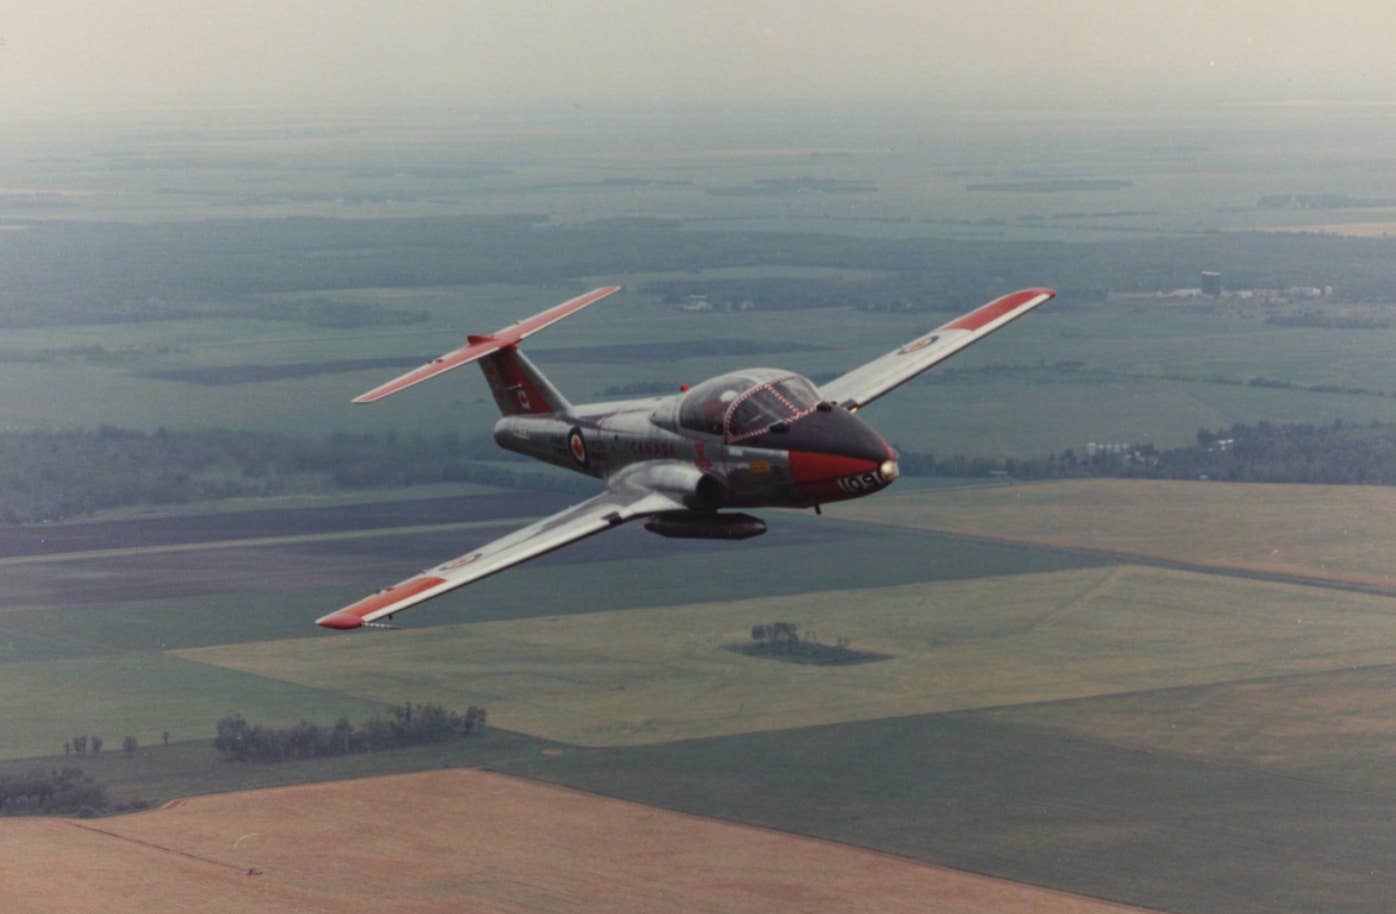 A CT-114 Tutor on a low-level navigation flight over the Canadian Prairies. This one has external fuel tanks, like the one we were flying in this story.<br>